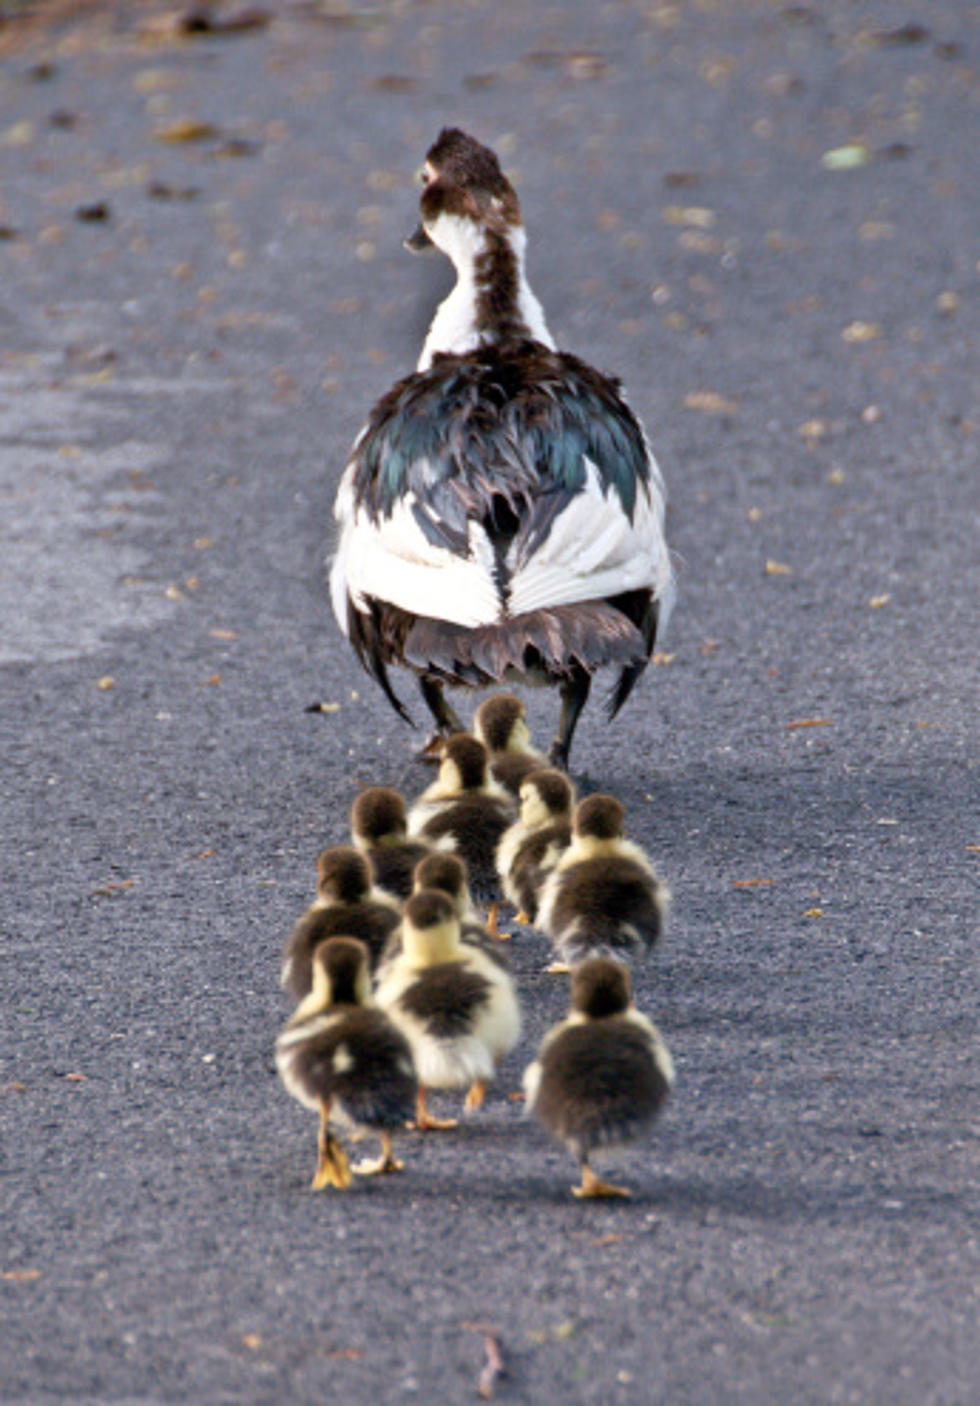 Good People Doing Good Things: Officer Stops Traffic For Ducks [Video]